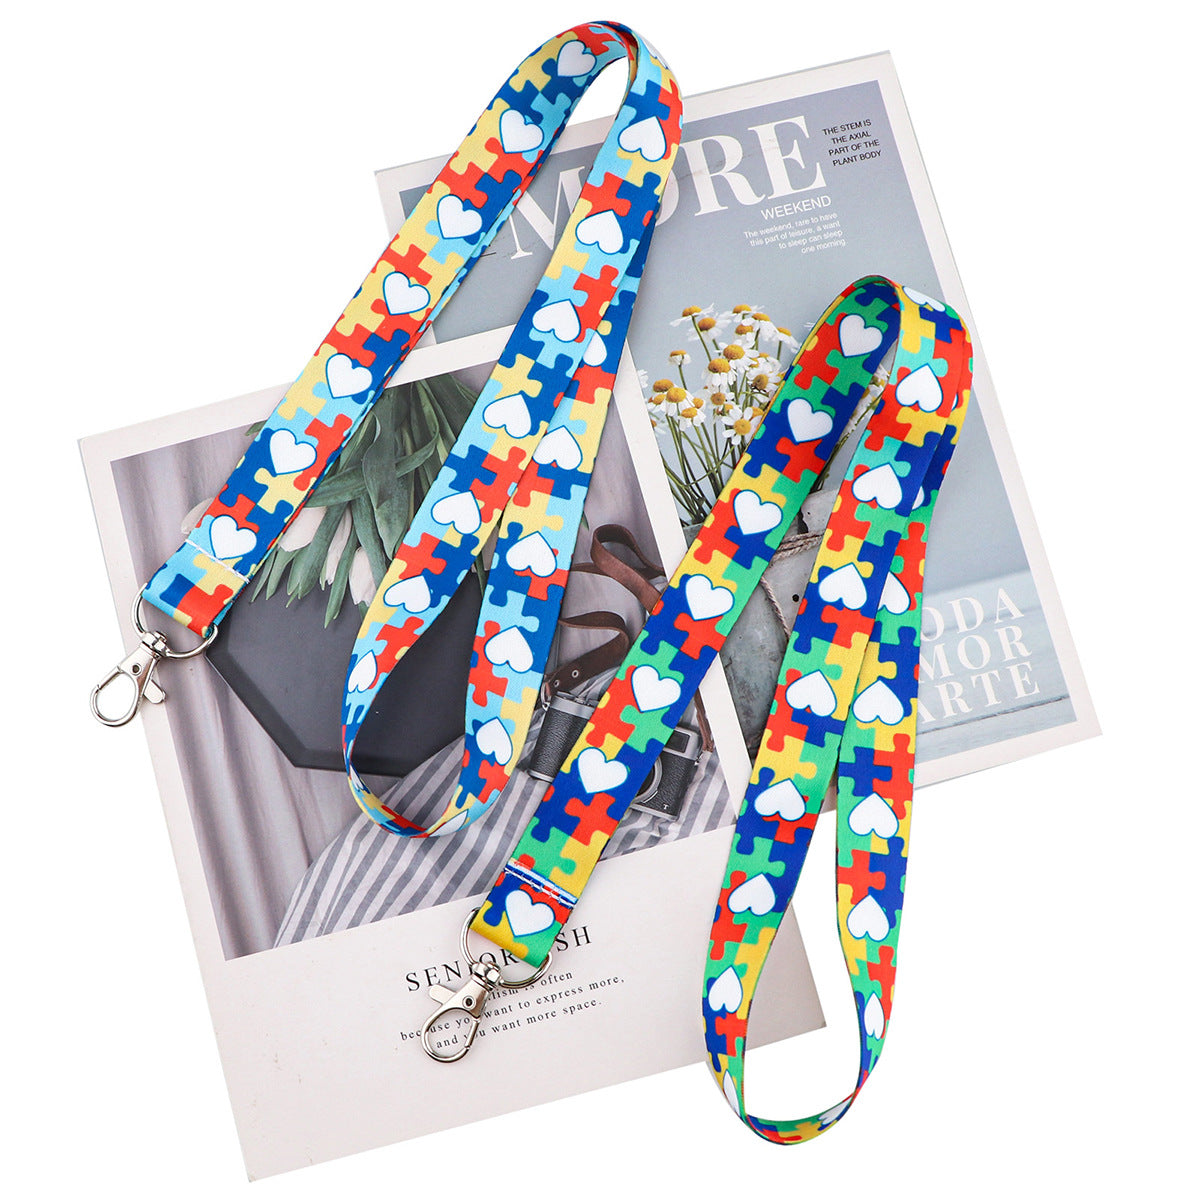 Care For Autism Long Neck Rope Double-sided Printing